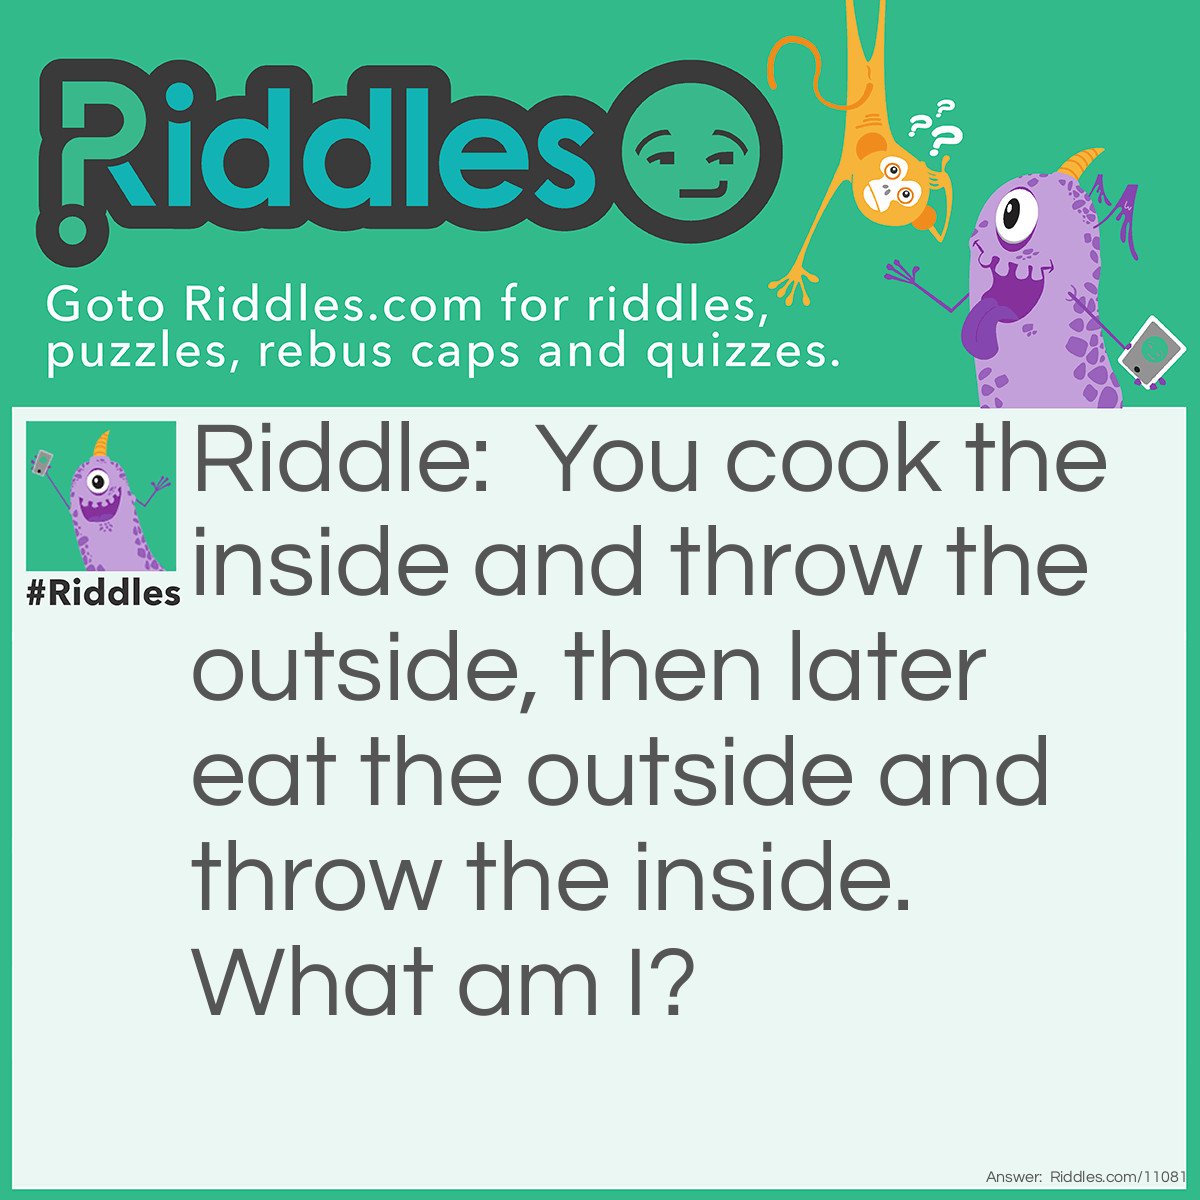 Riddle: You cook the inside and throw the outside, then later eat the outside and throw the inside. What am I? Answer: Maize corn.